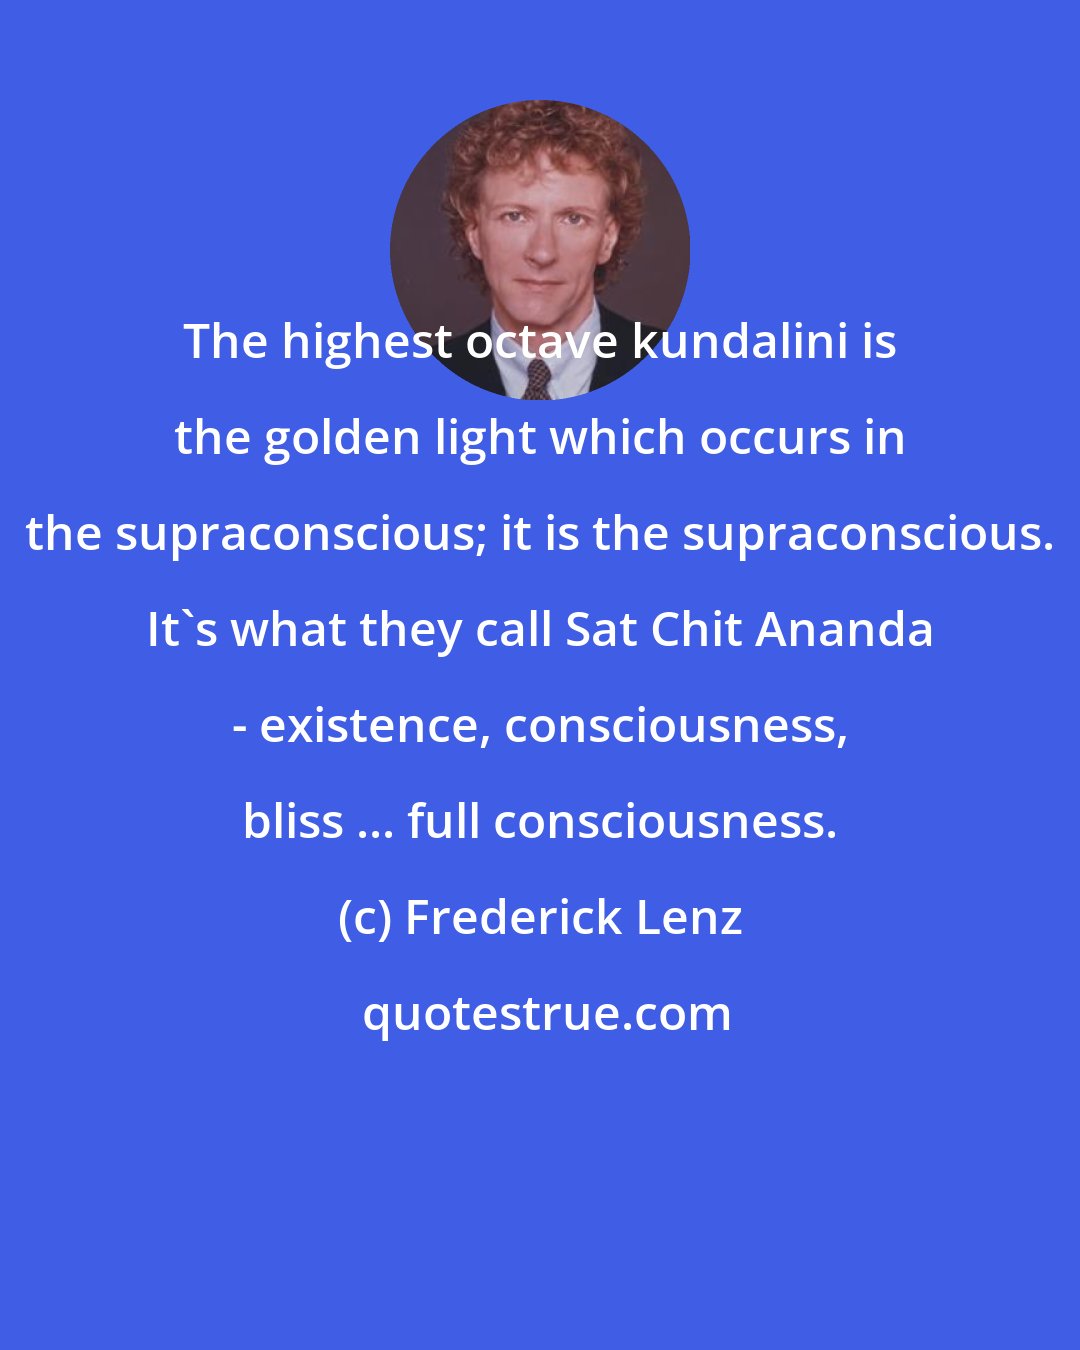 Frederick Lenz: The highest octave kundalini is the golden light which occurs in the supraconscious; it is the supraconscious. It's what they call Sat Chit Ananda - existence, consciousness, bliss ... full consciousness.